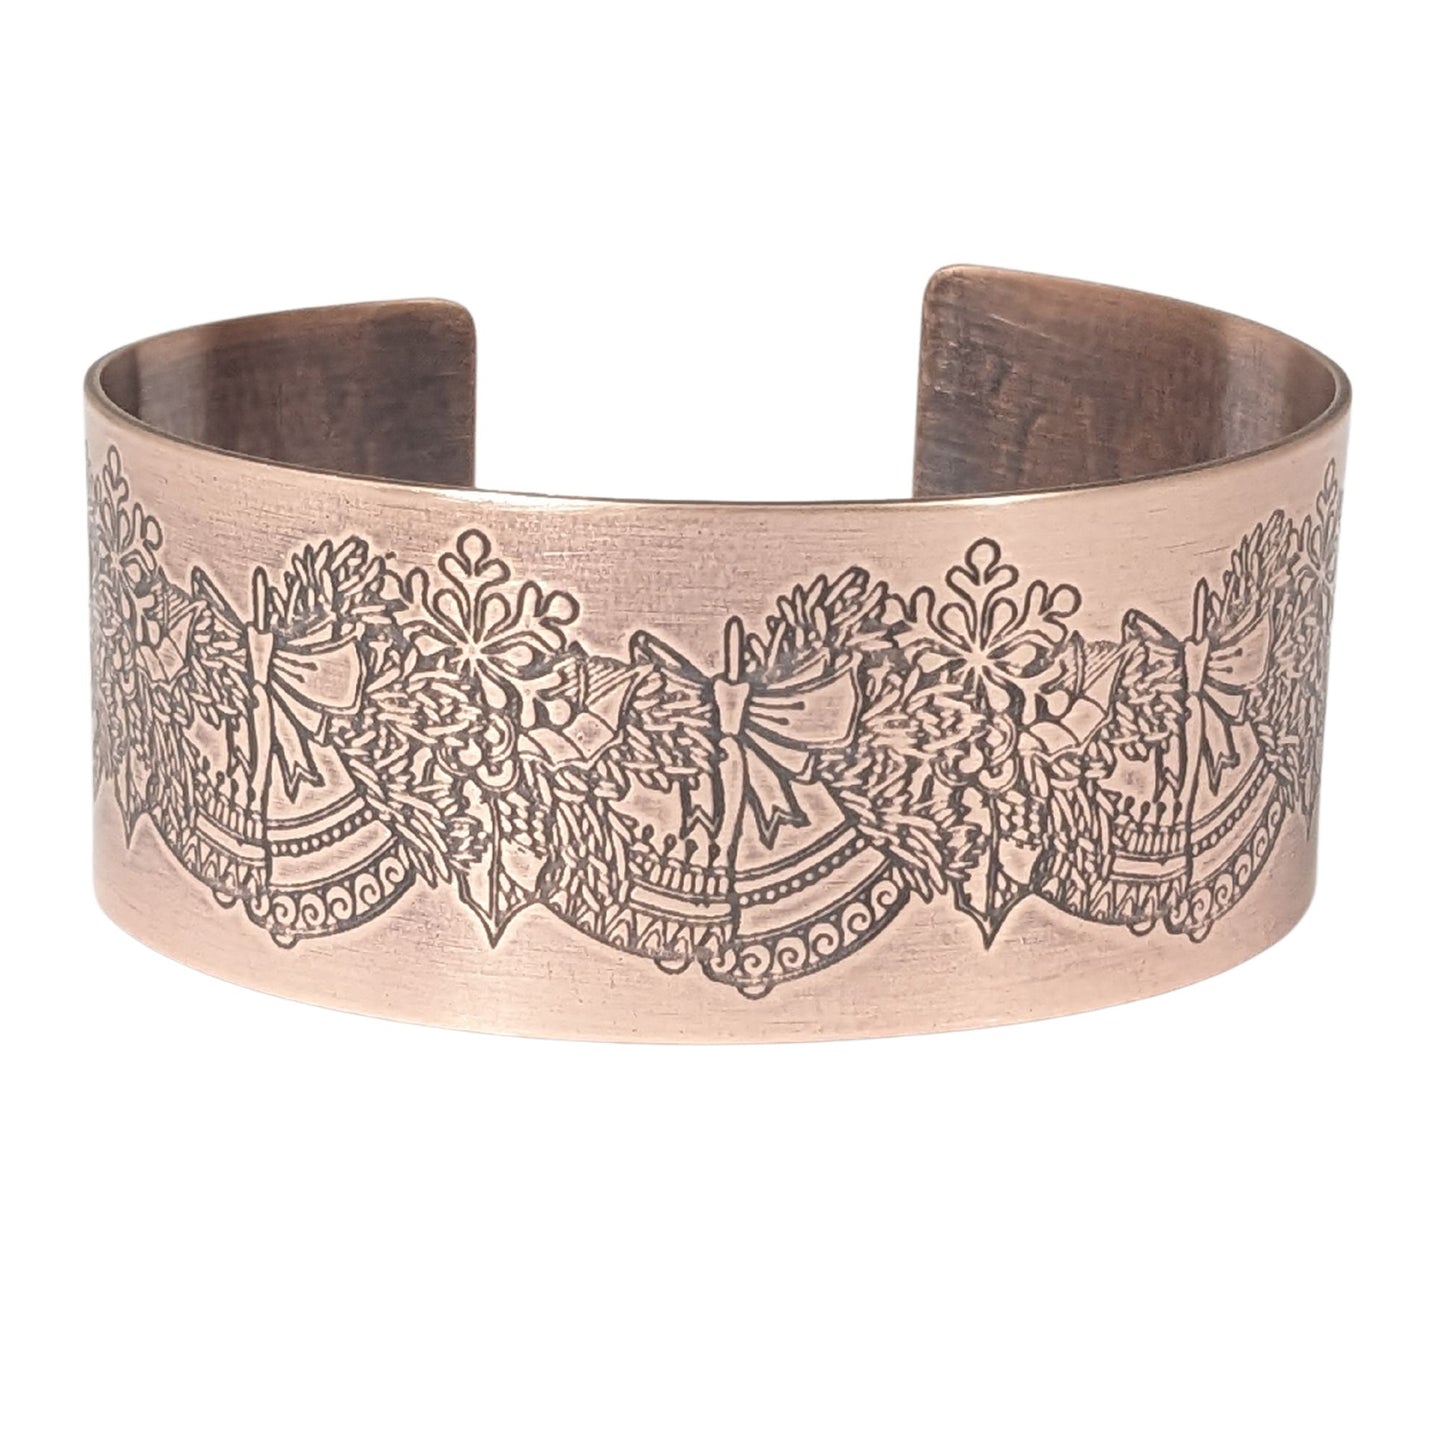 copper cuff bracelet. pattern along entire length is an evergreen bough with pairs of bells.